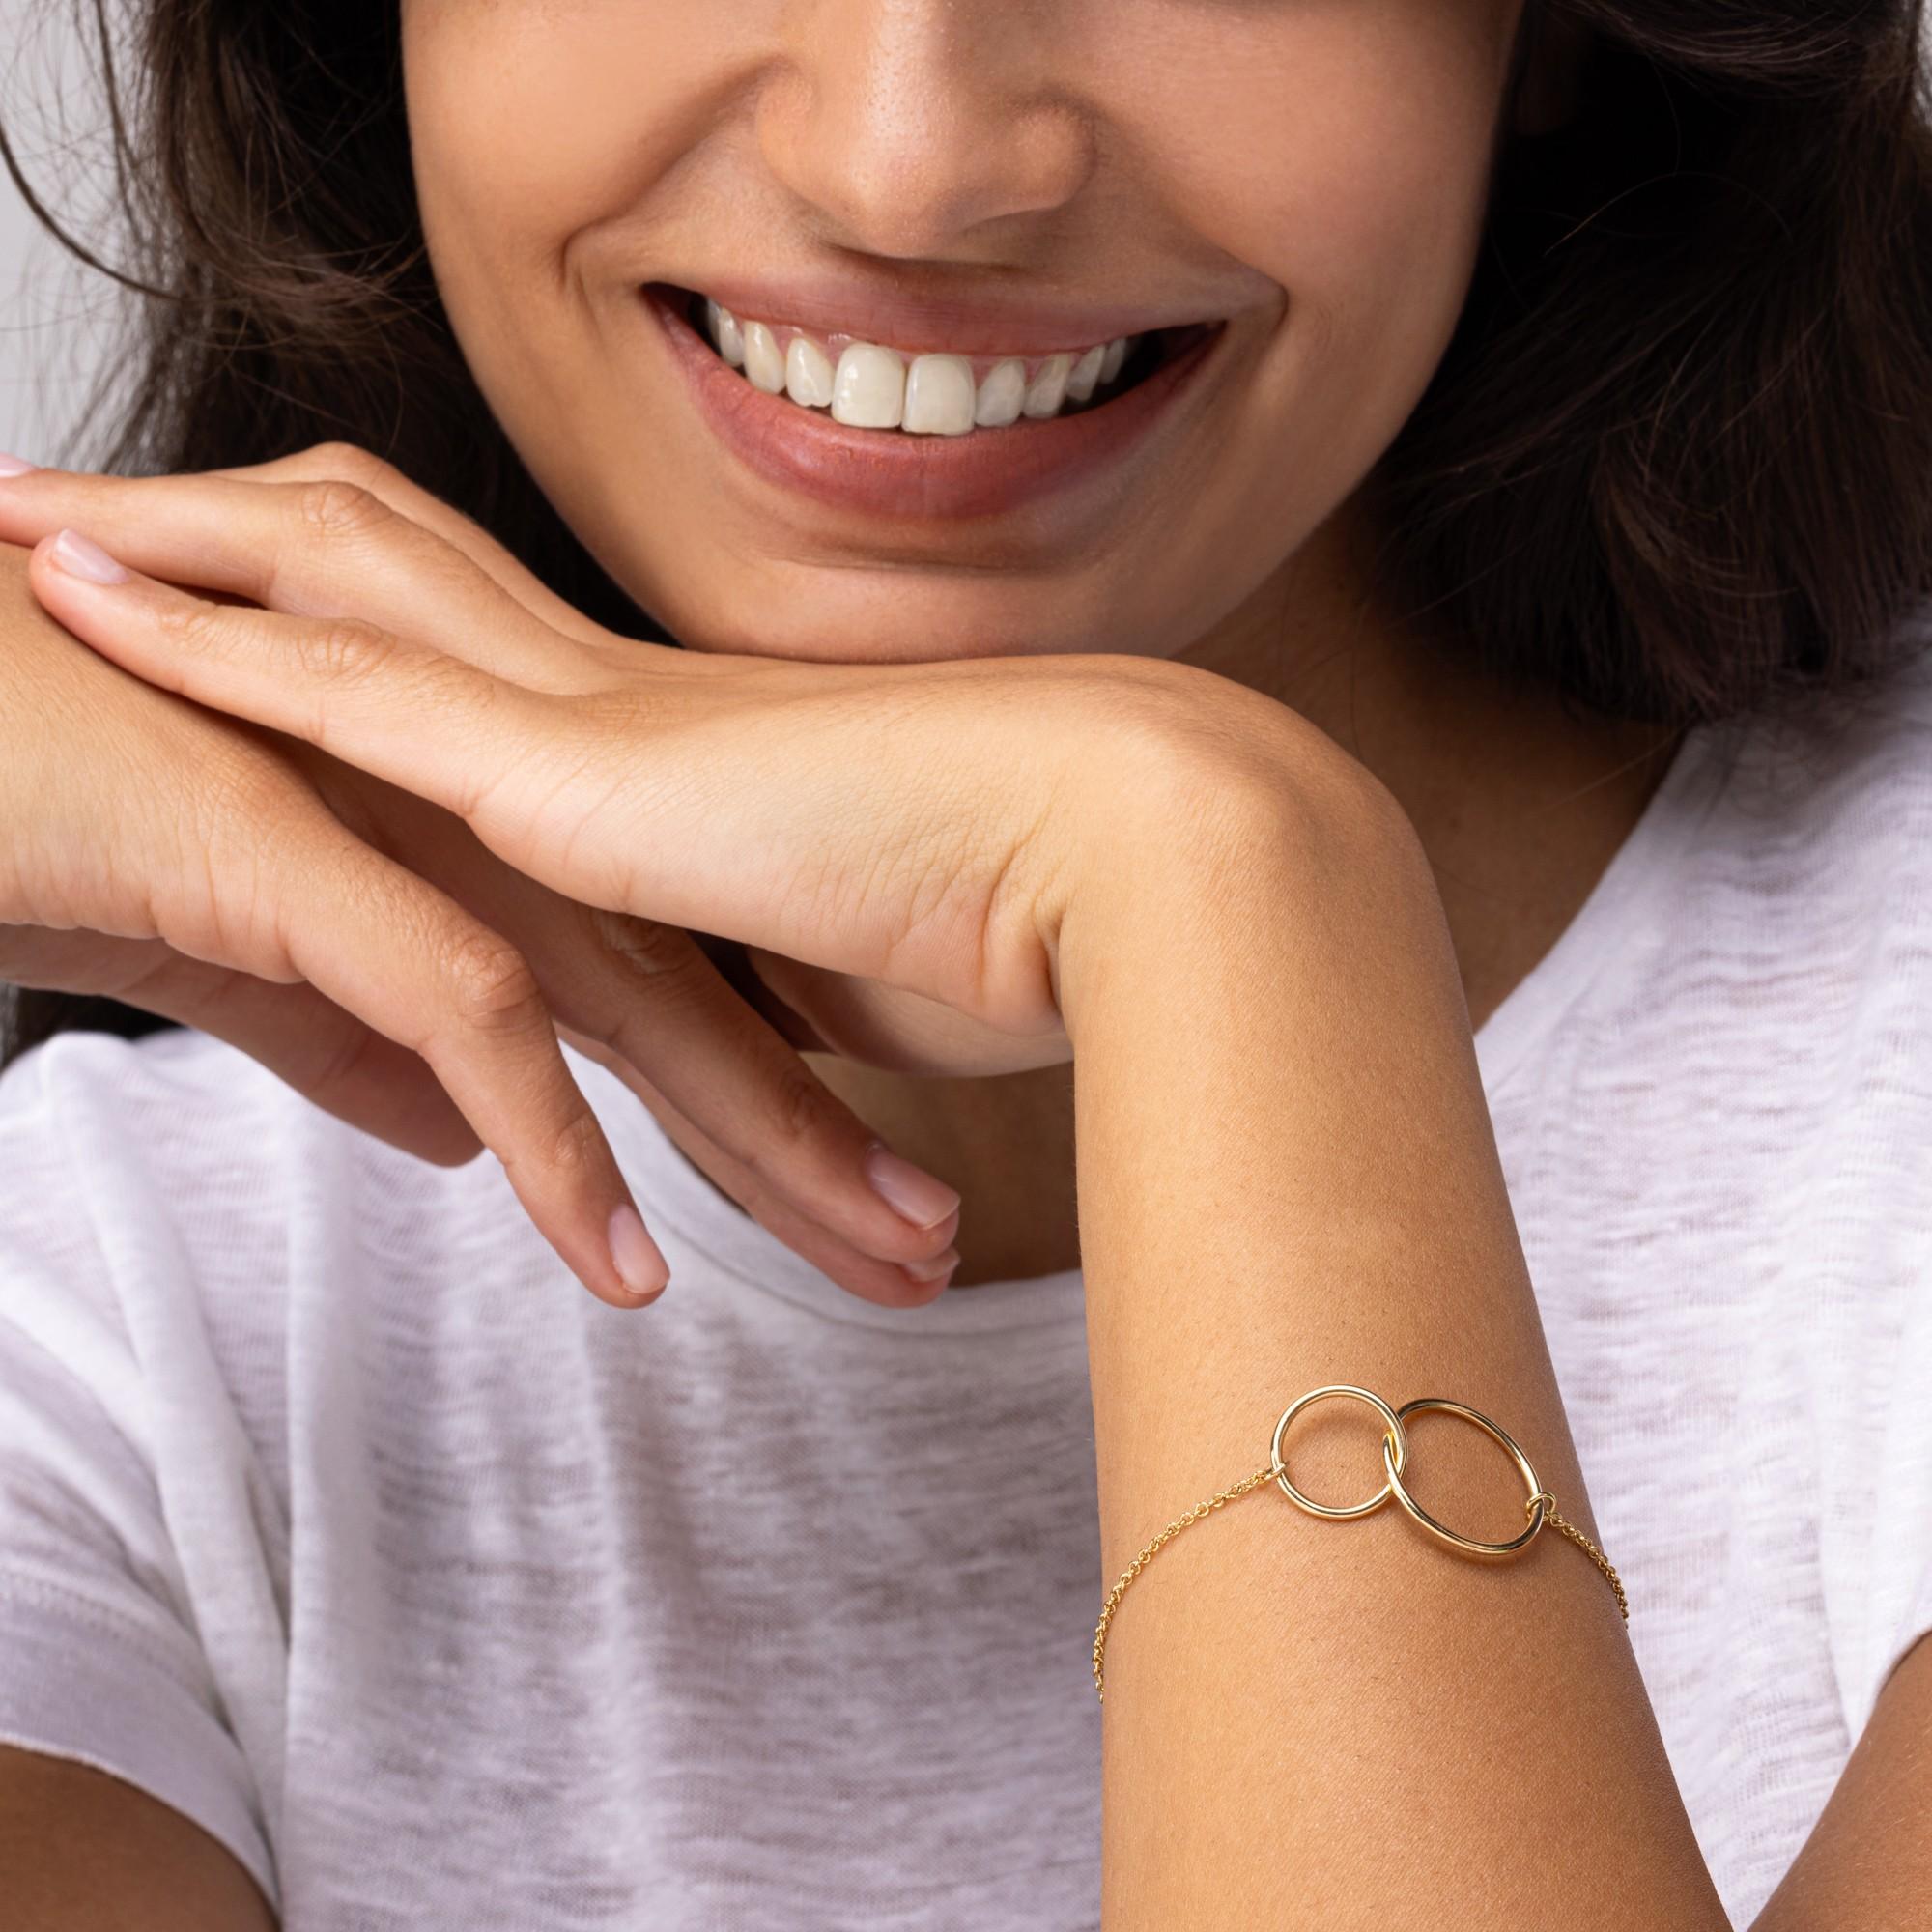 Alex Jona design collection, hand crafted in Italy, 18 karat yellow gold chain bracelet centering two interlocking gold hoops.
Alex Jona jewels stand out, not only for their special design and for the excellent quality of the gemstones, but also for